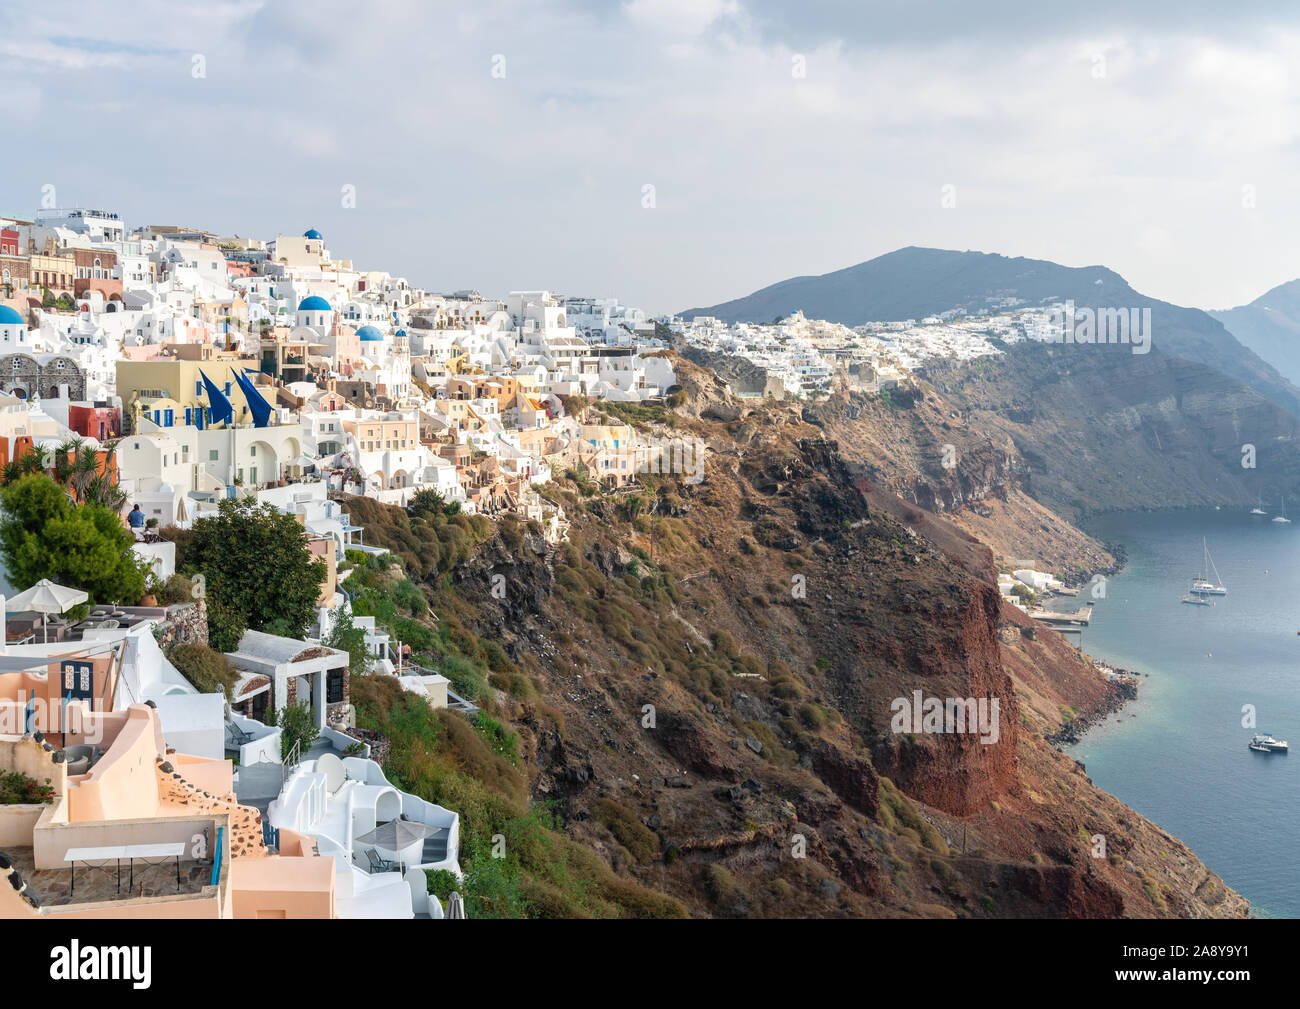 1st Nov 2019 - Santorini, Greece. Whitewashed buildings in Oia village situated high on the rock above Aegean sea. Stock Photo